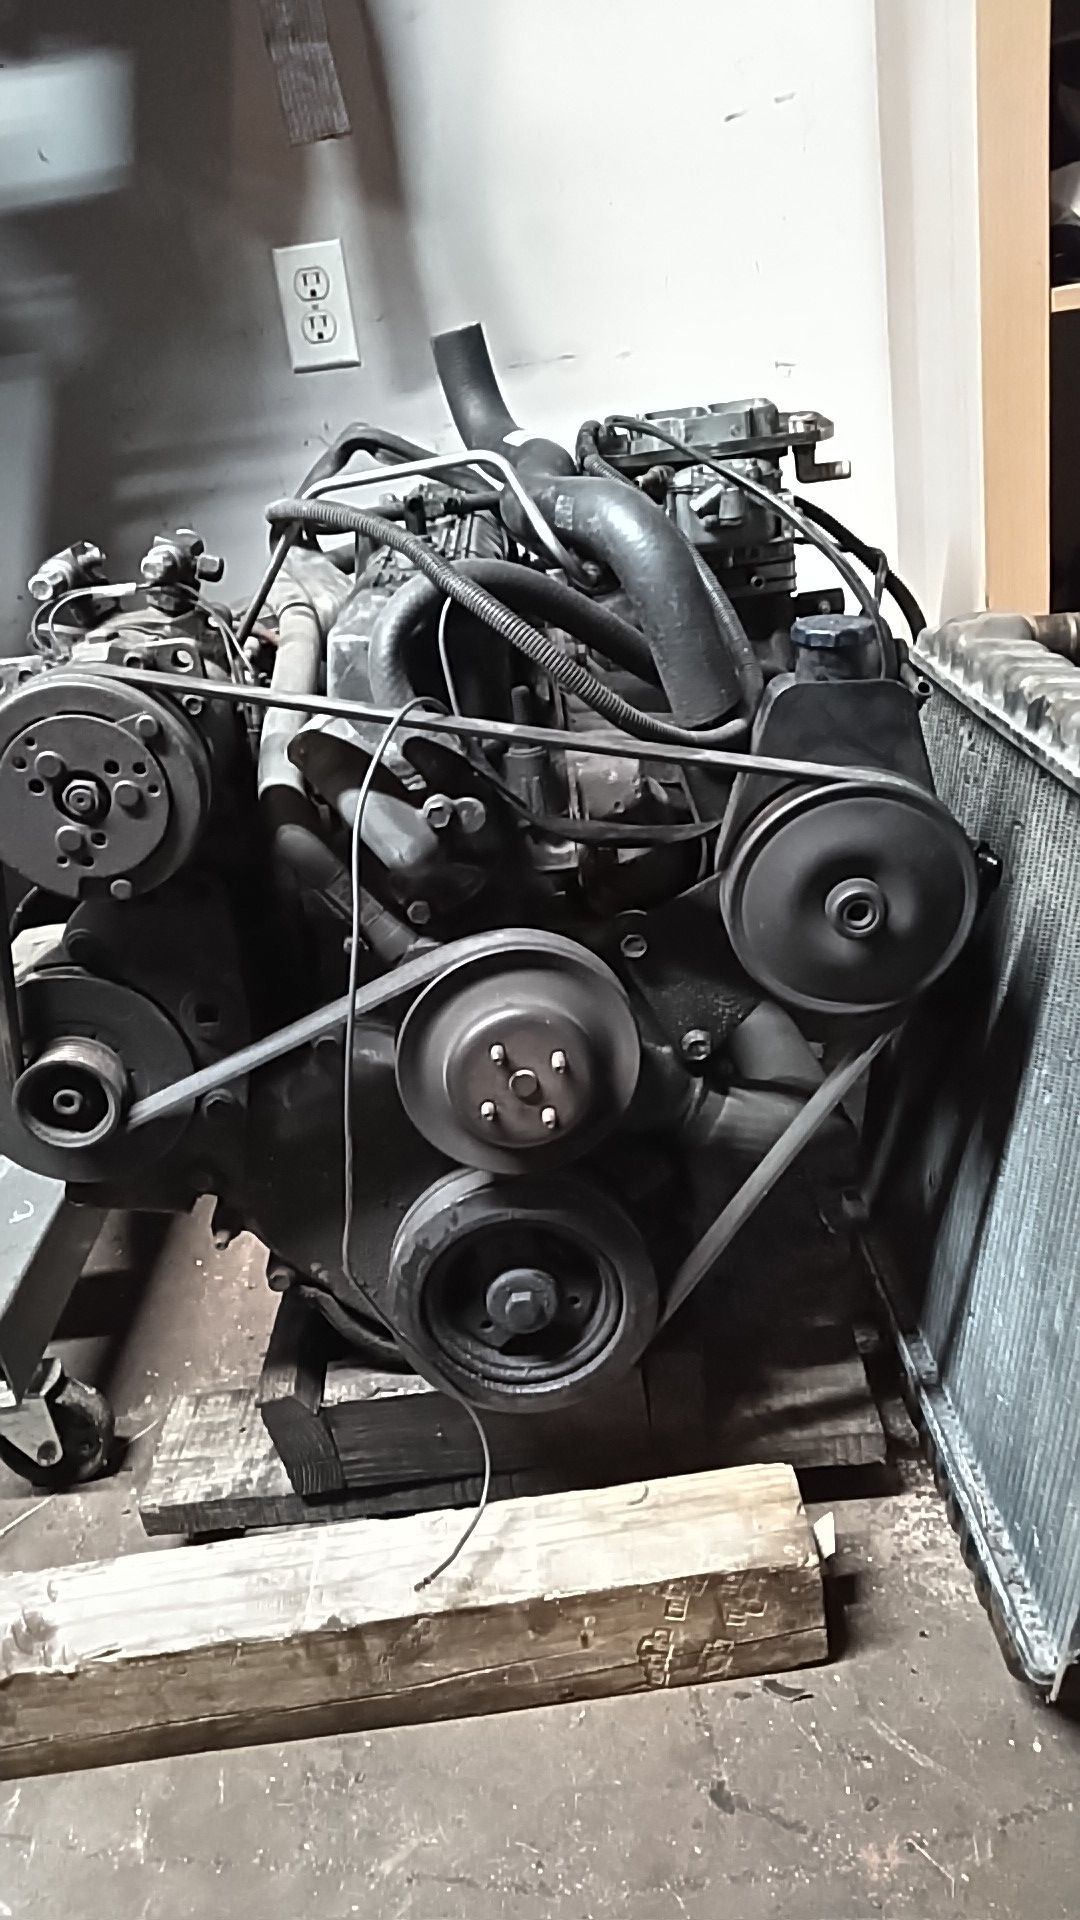 Jeep yj 4.2 engine with factory a/c